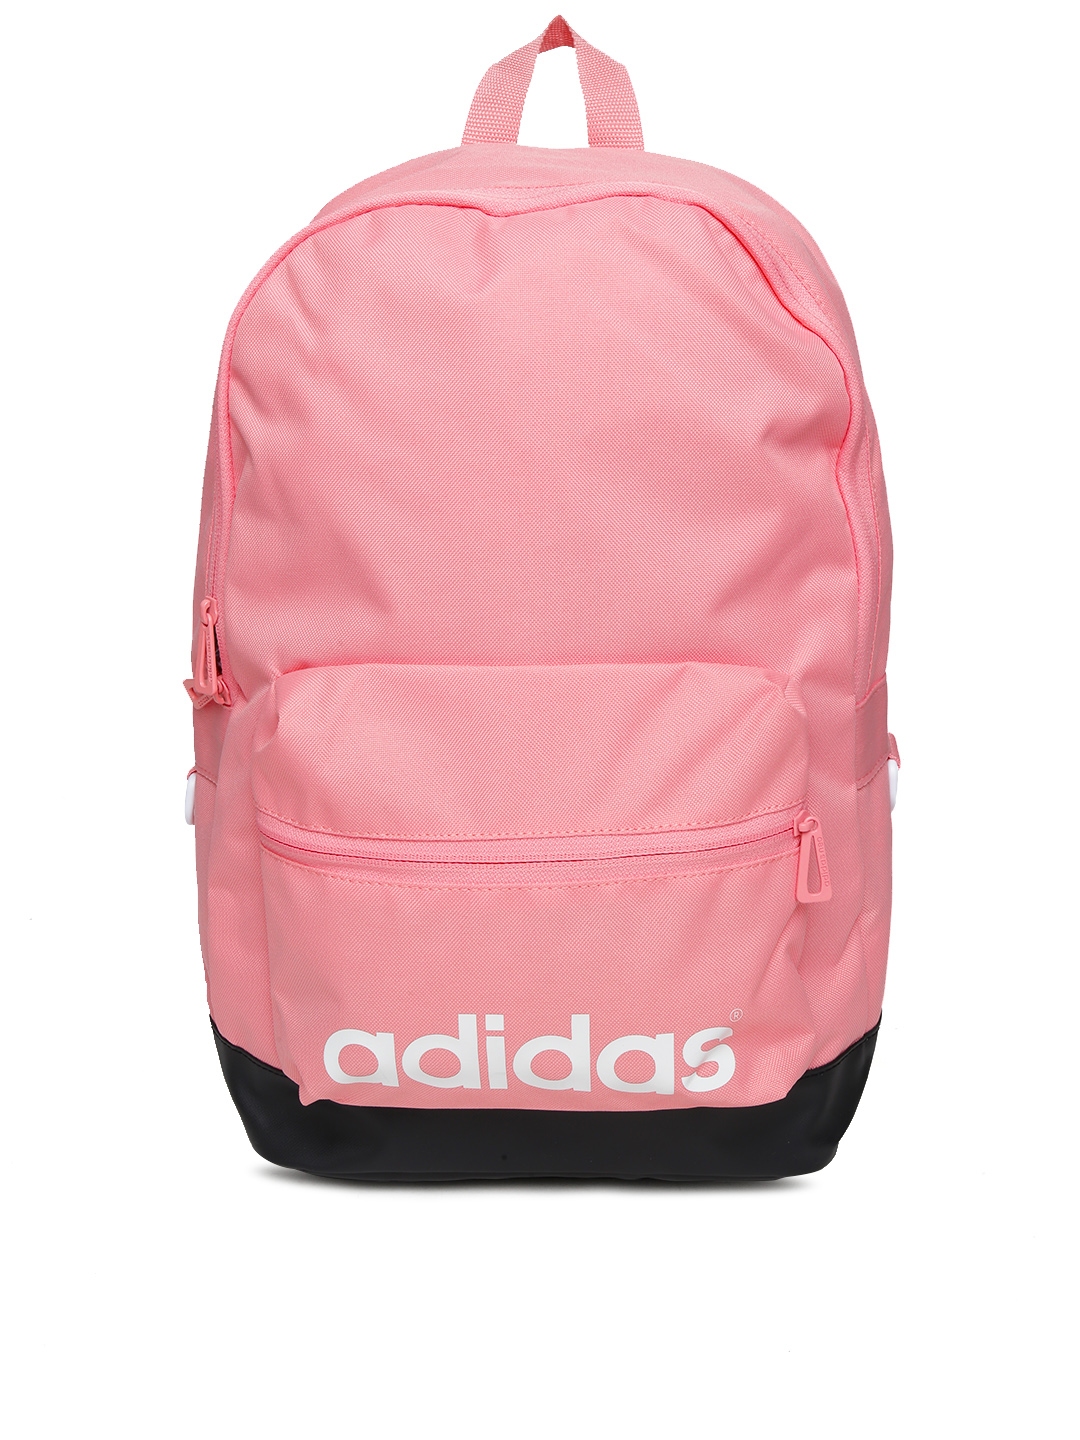 pink adidas bag, Up to 50% Off adidas Shoes & Apparel Sale | adidas online